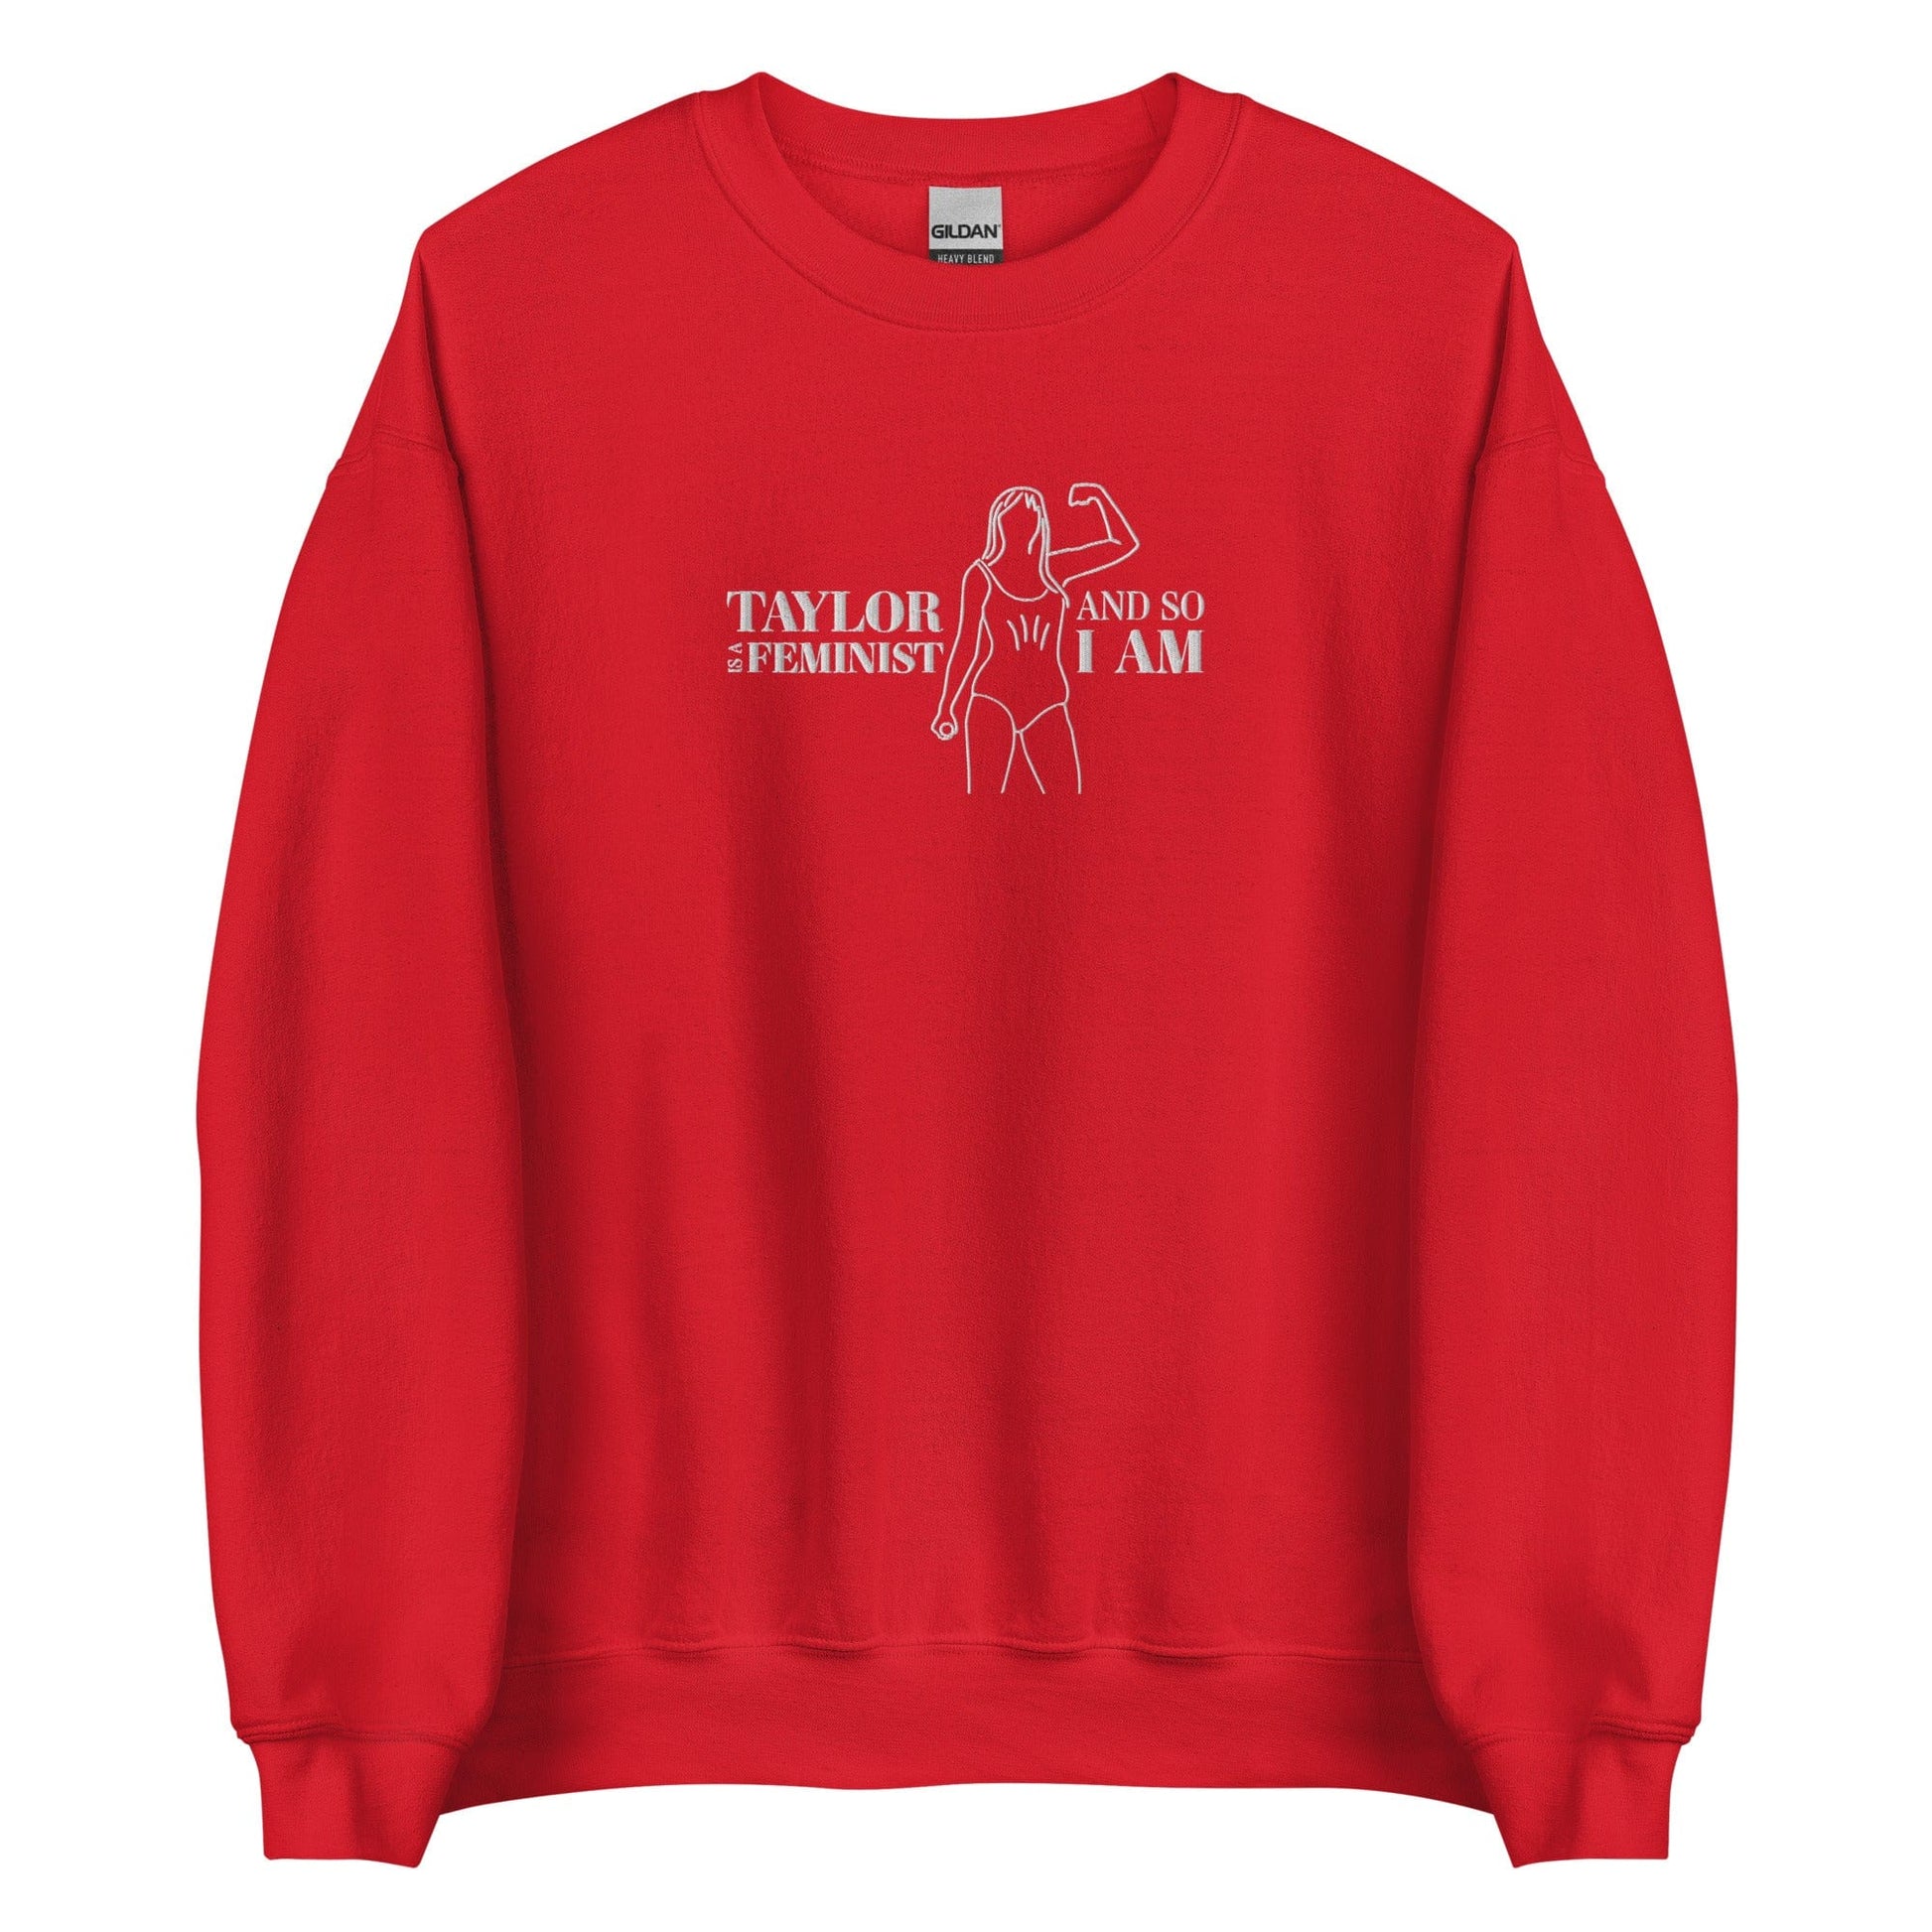 Taylor-embroidery-feminist-sweatshirt-red-front